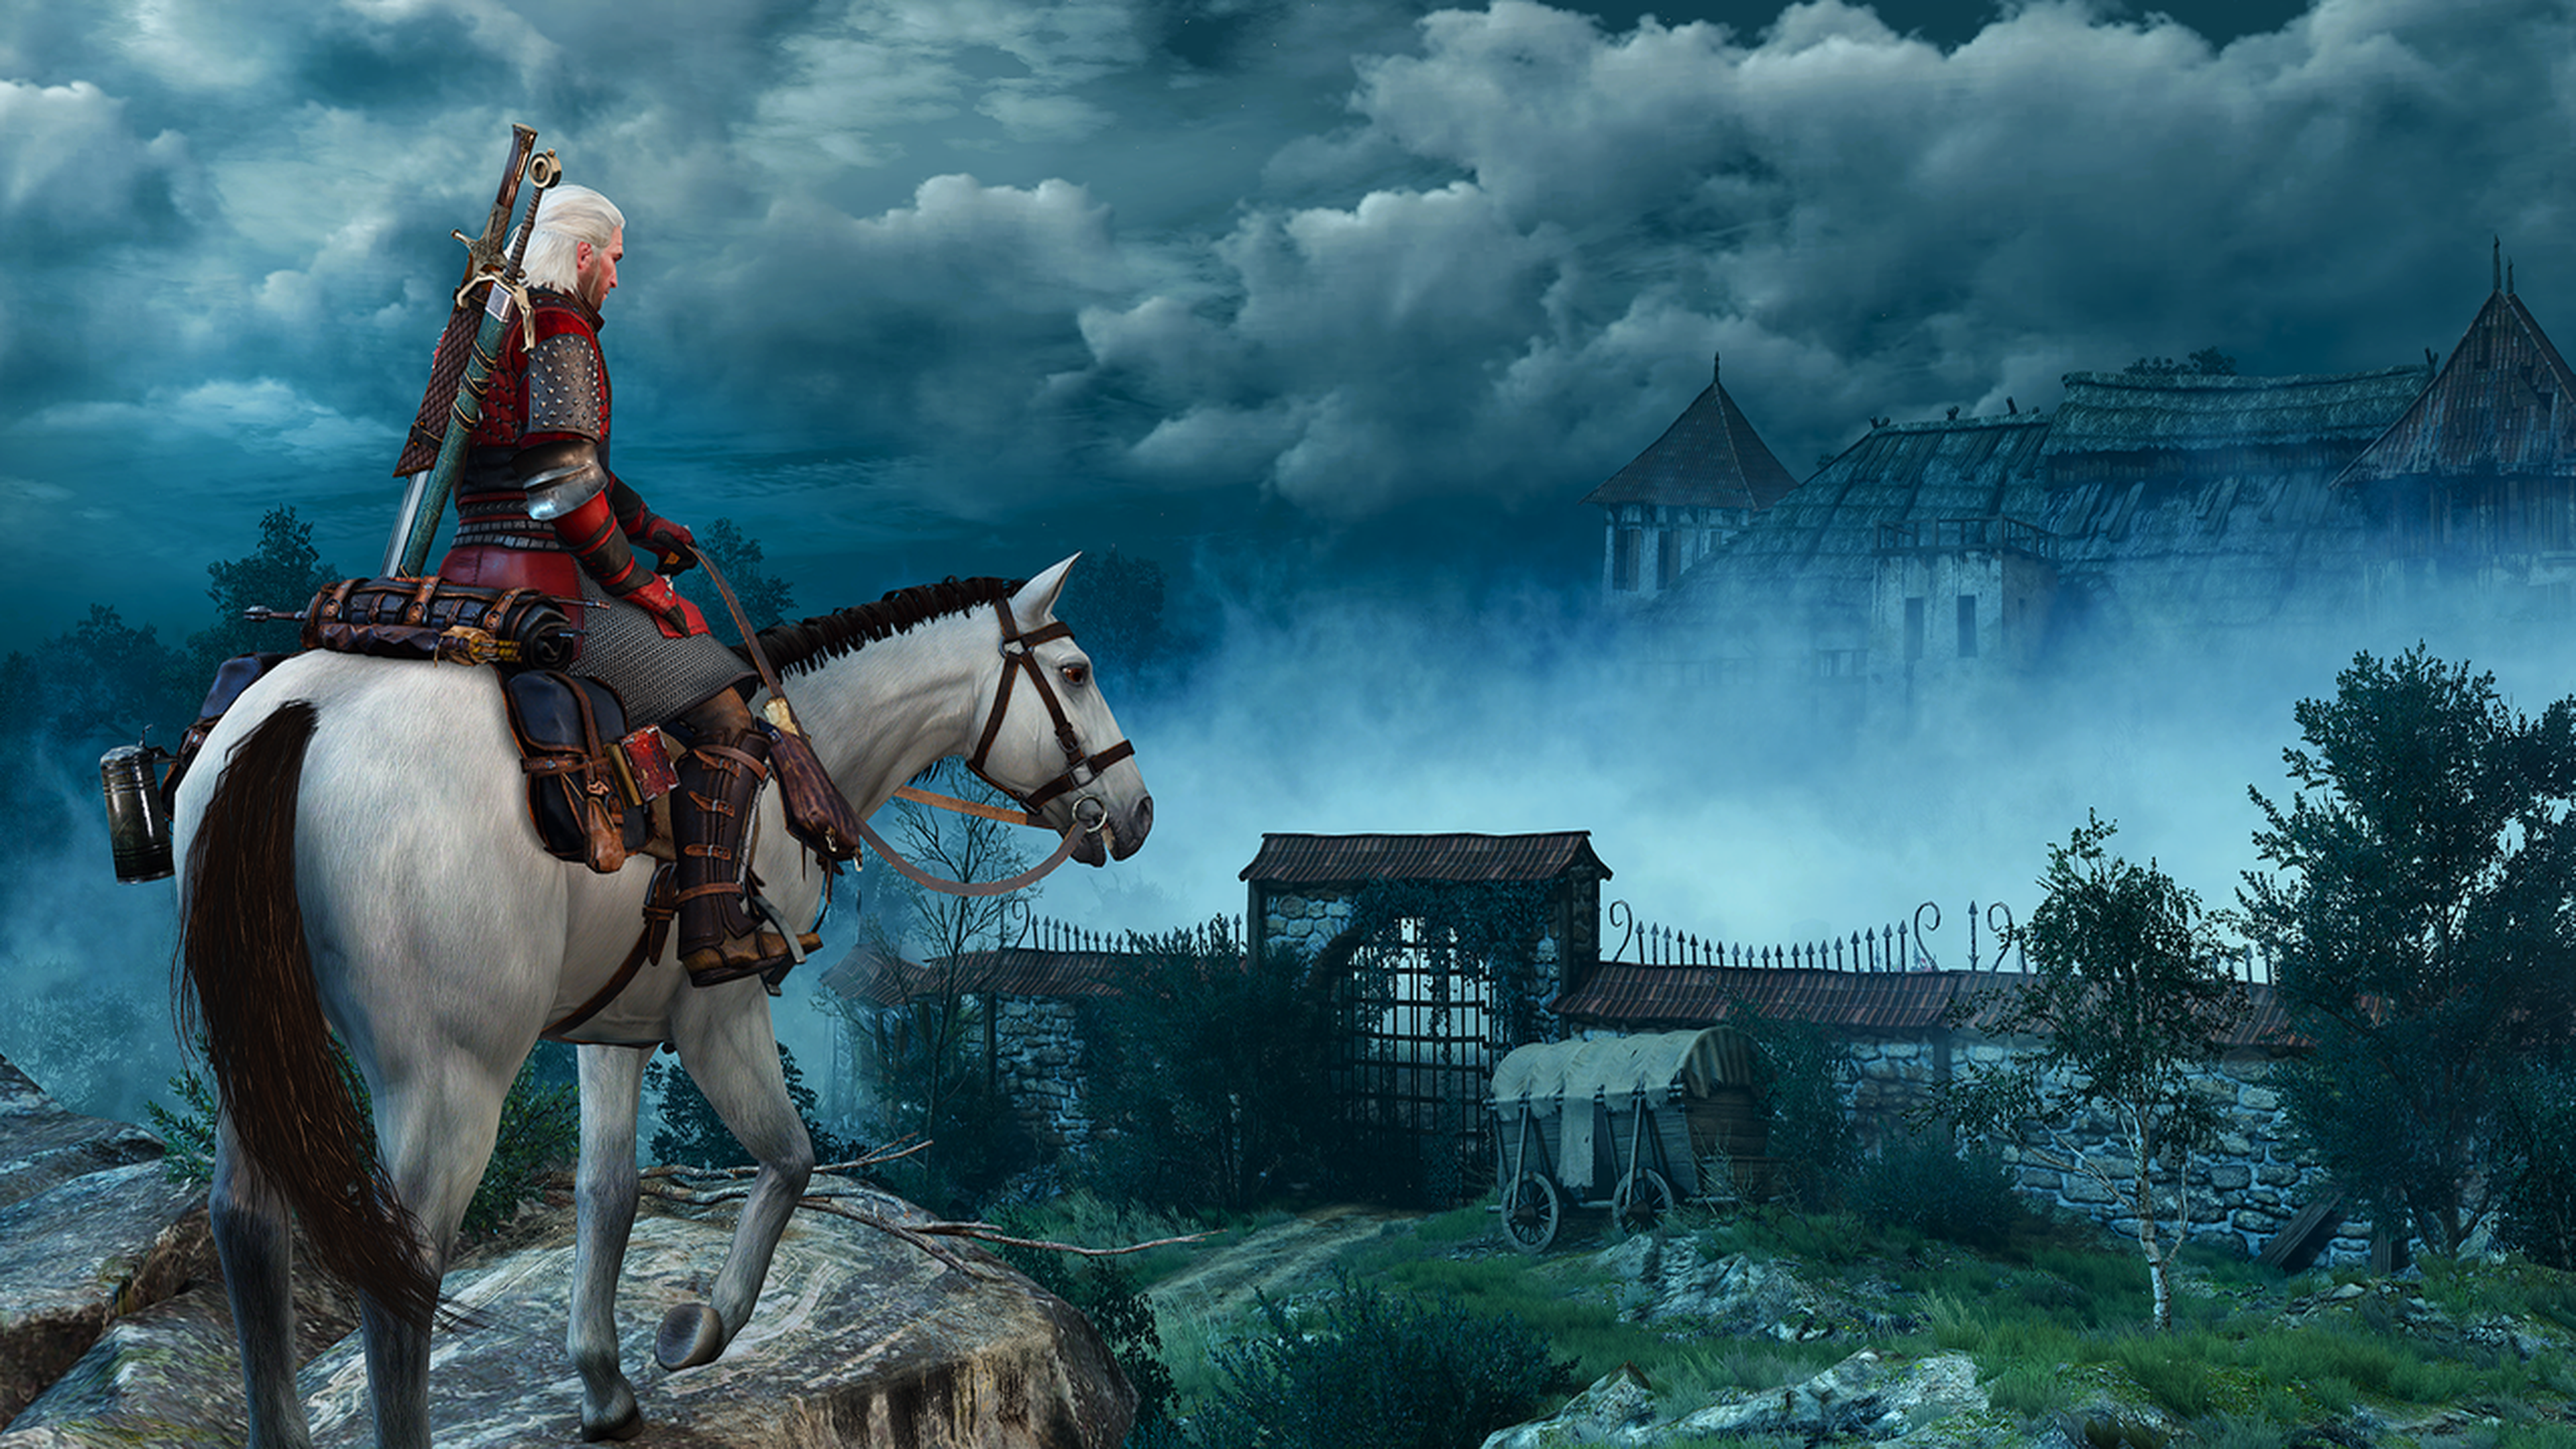 Avance de The Witcher Hearts of Stone